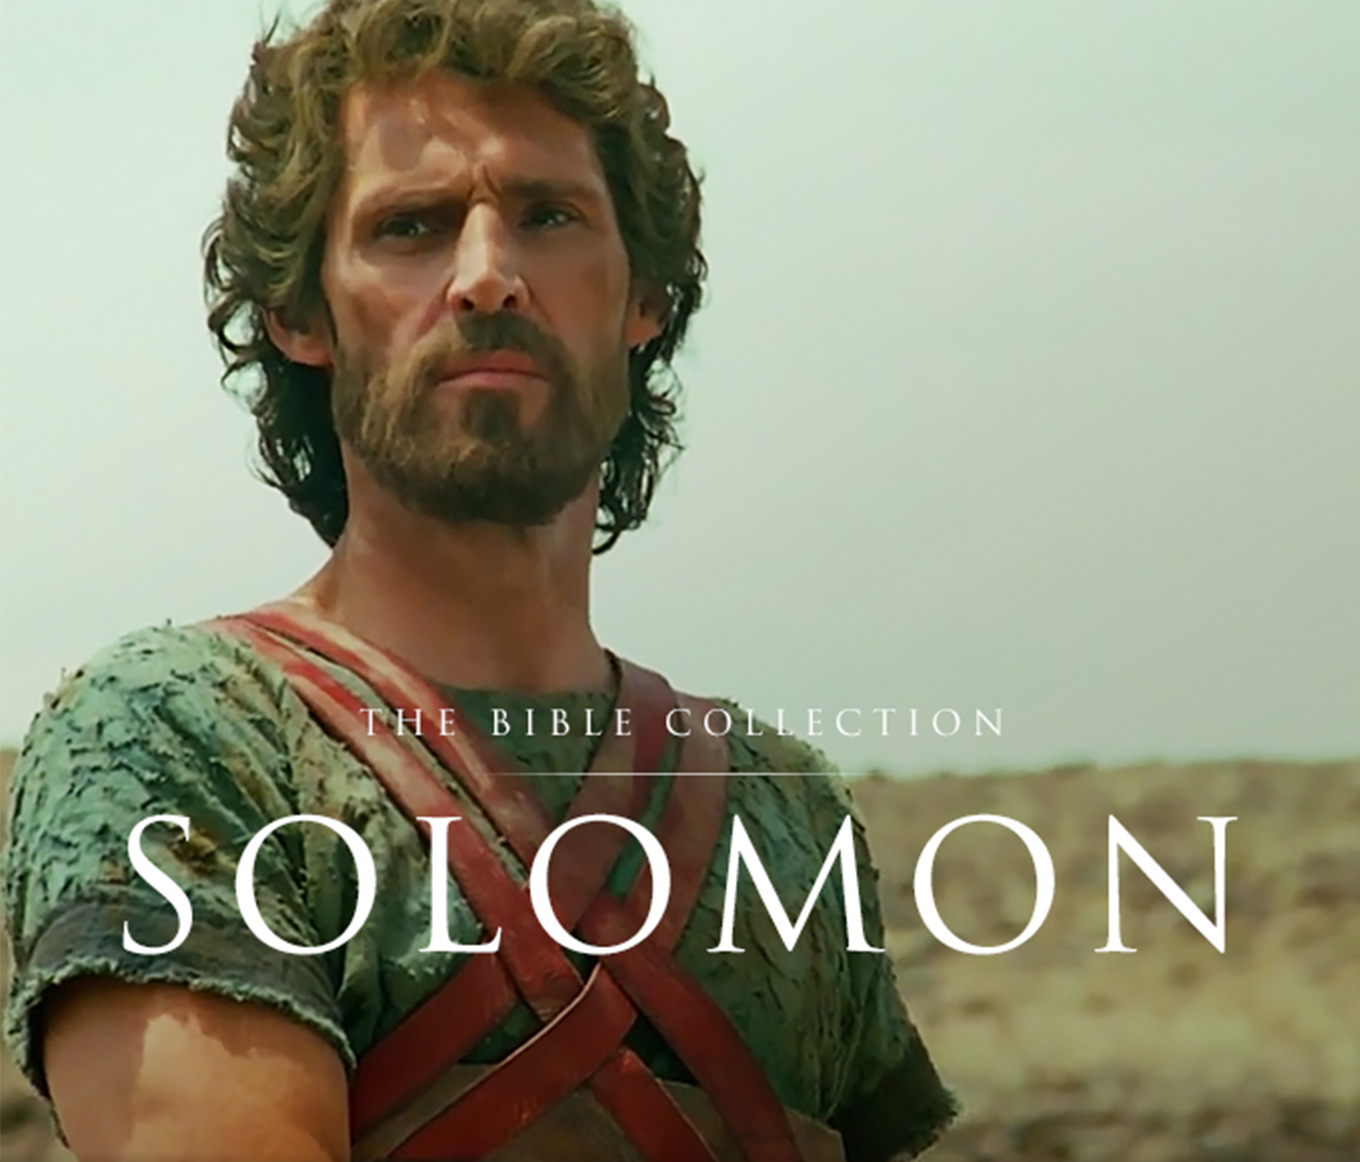 The Bible Collection: Solomon movie poster